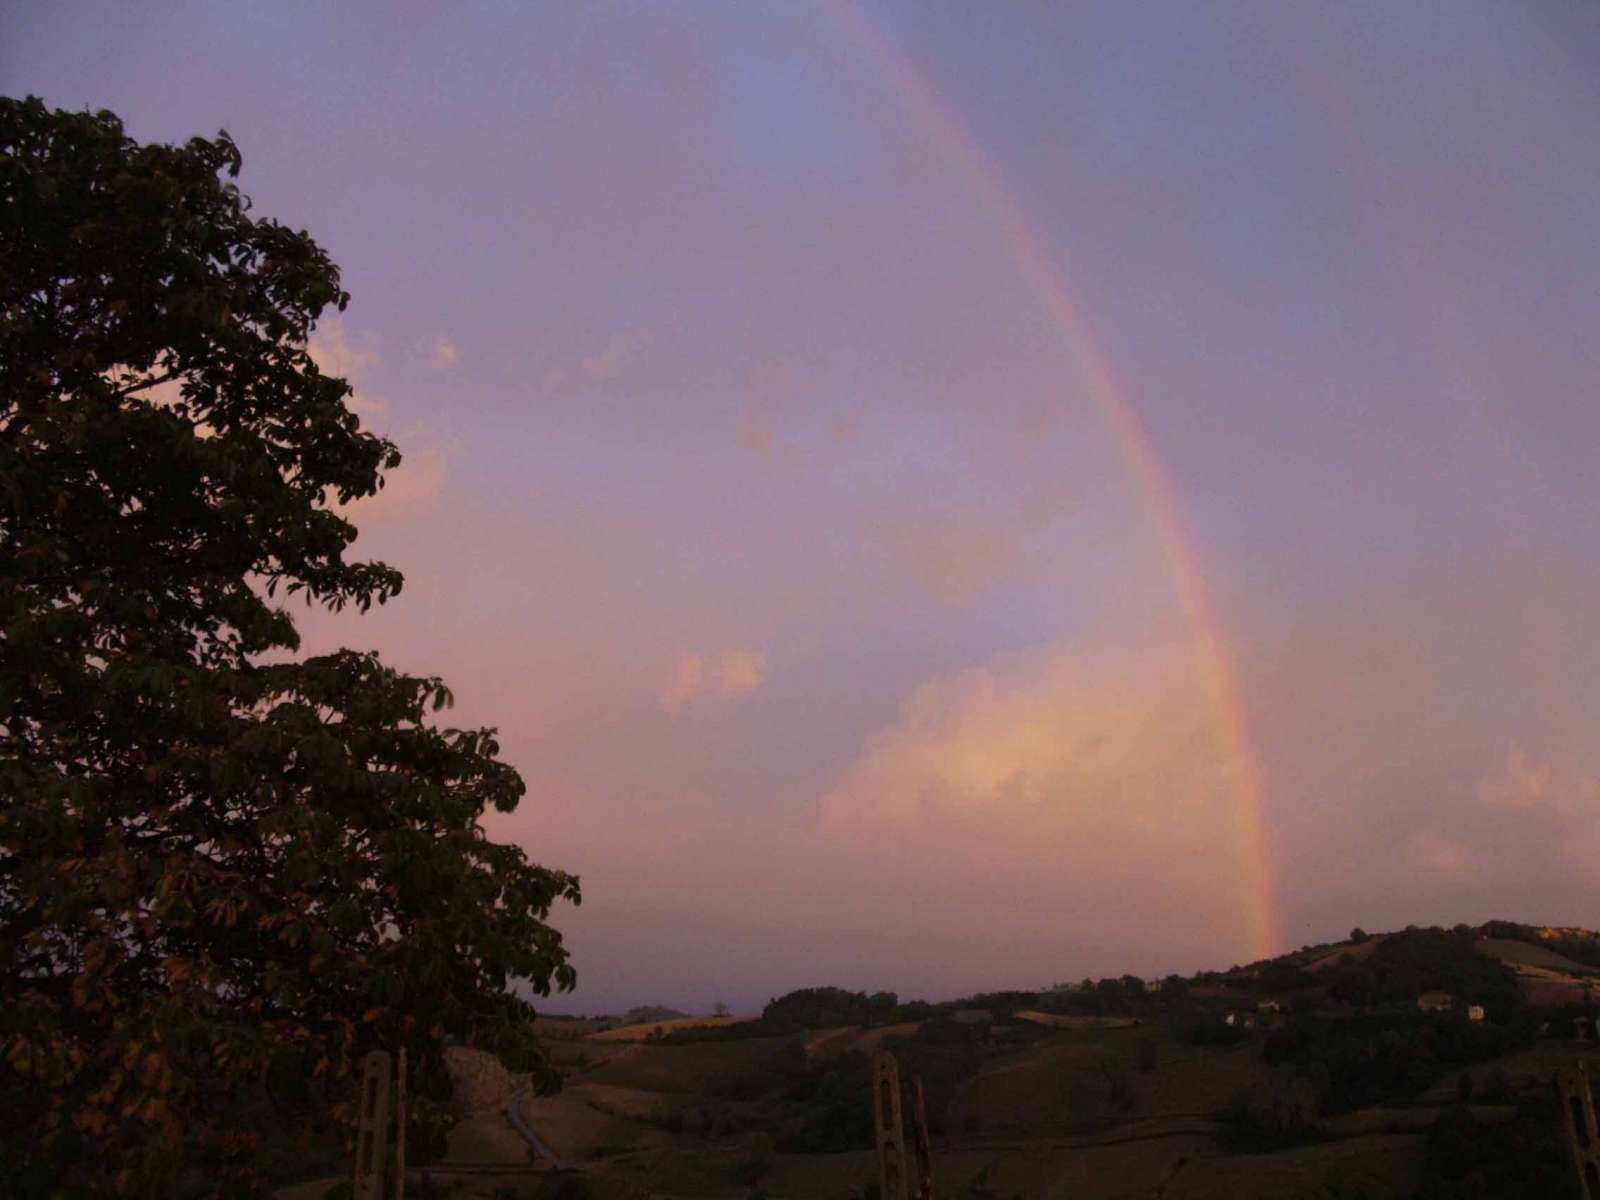 Double rainbow on Appennino: 84 KB; click on the image to enlarge